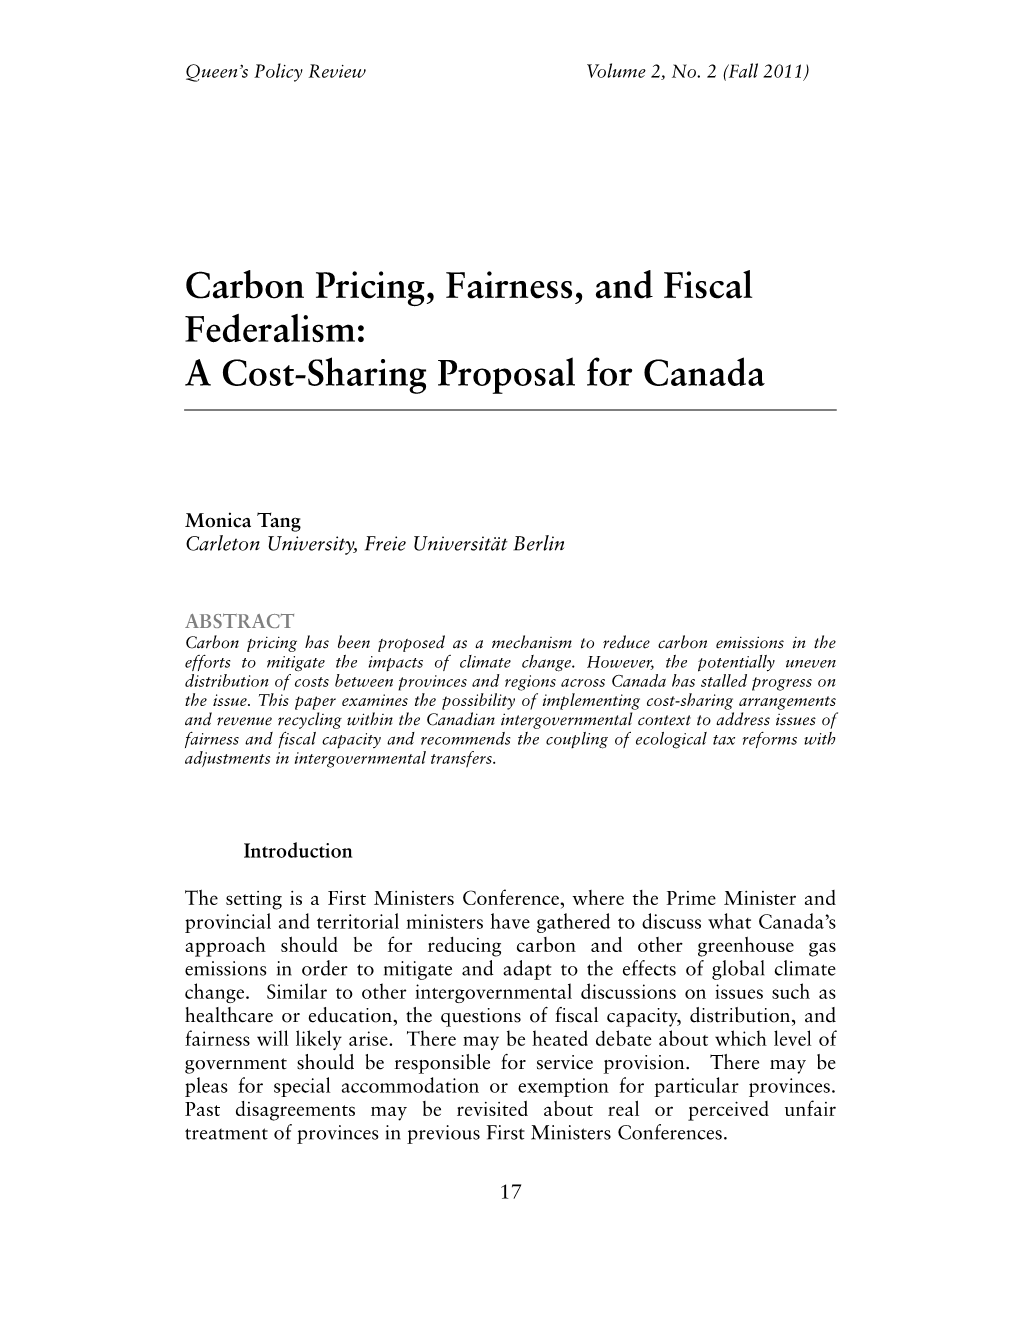 Carbon Pricing, Fairness, and Fiscal Federalism: a Cost-Sharing Proposal for Canada